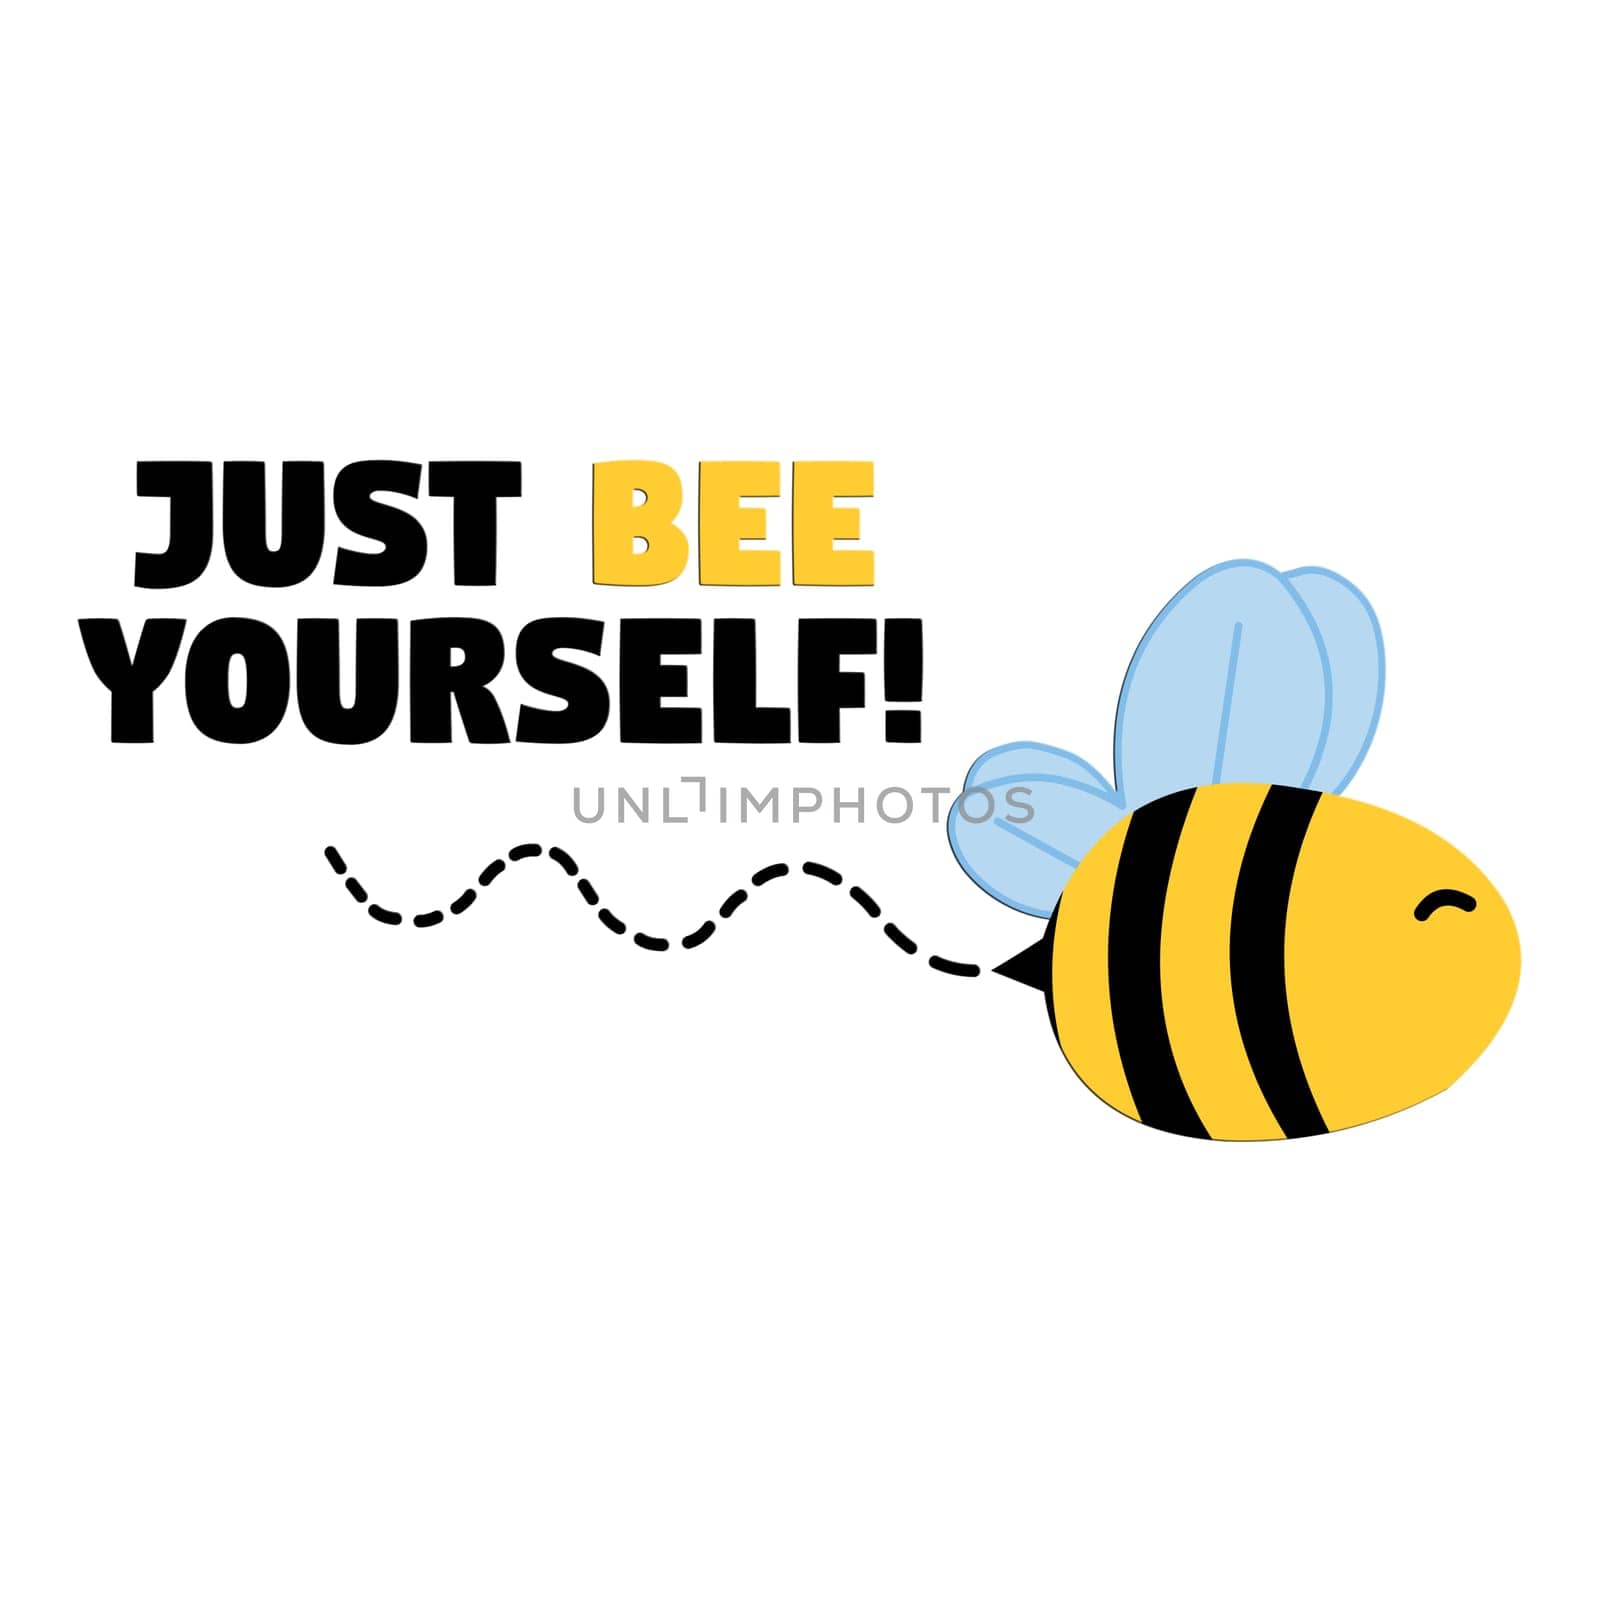 A flying bee with the text "Just Bee Yourself".